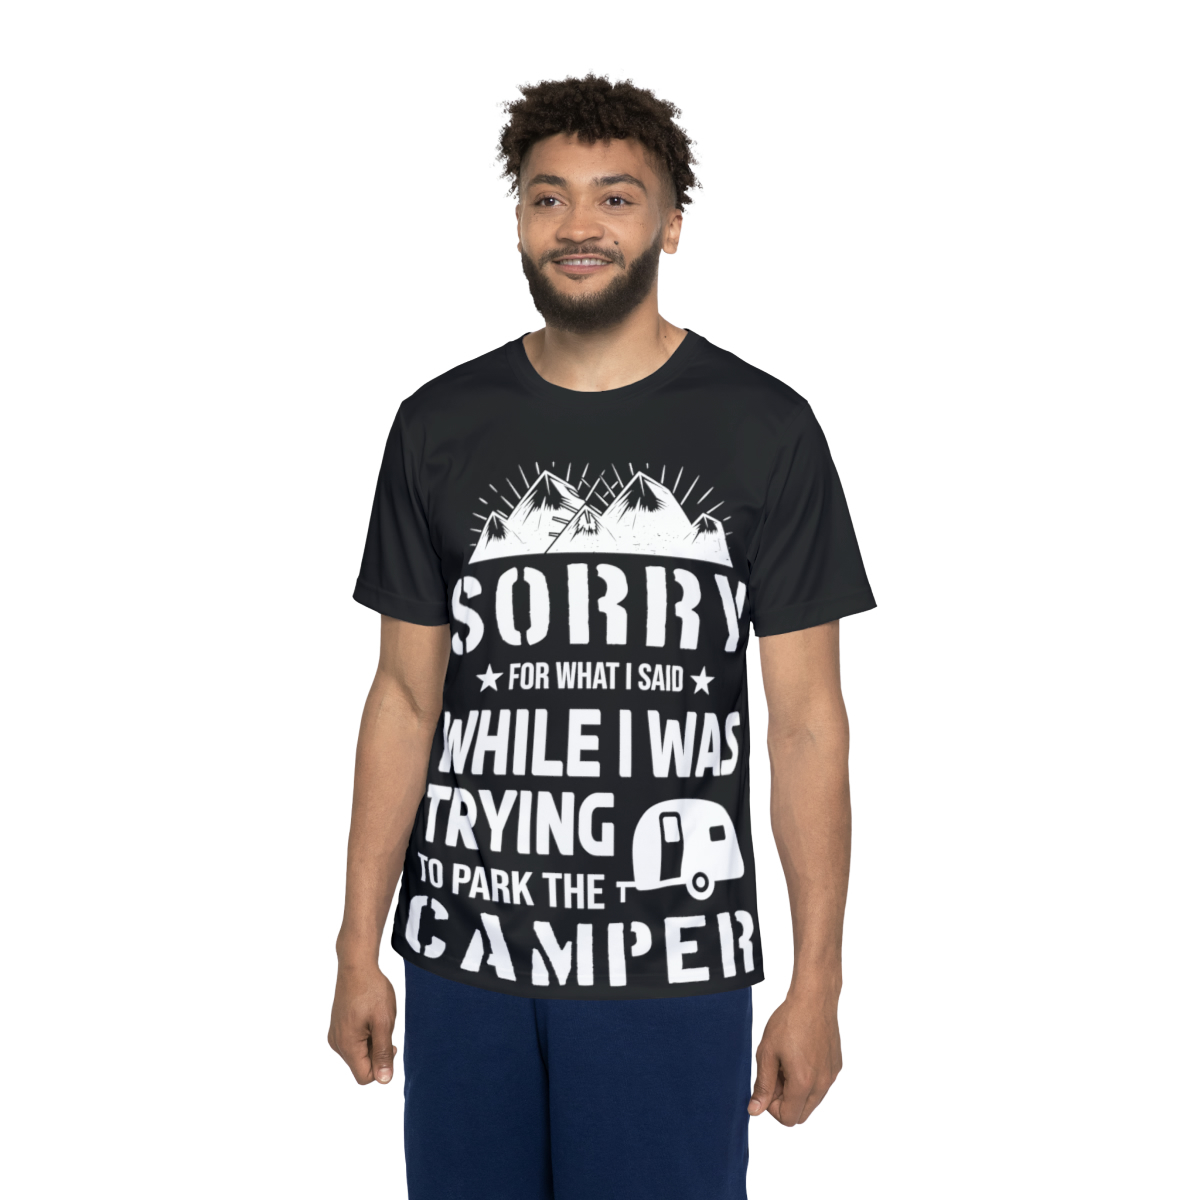 Primary image for Sorry for What I Said - Humorous Camper Parking Meme T-Shirt